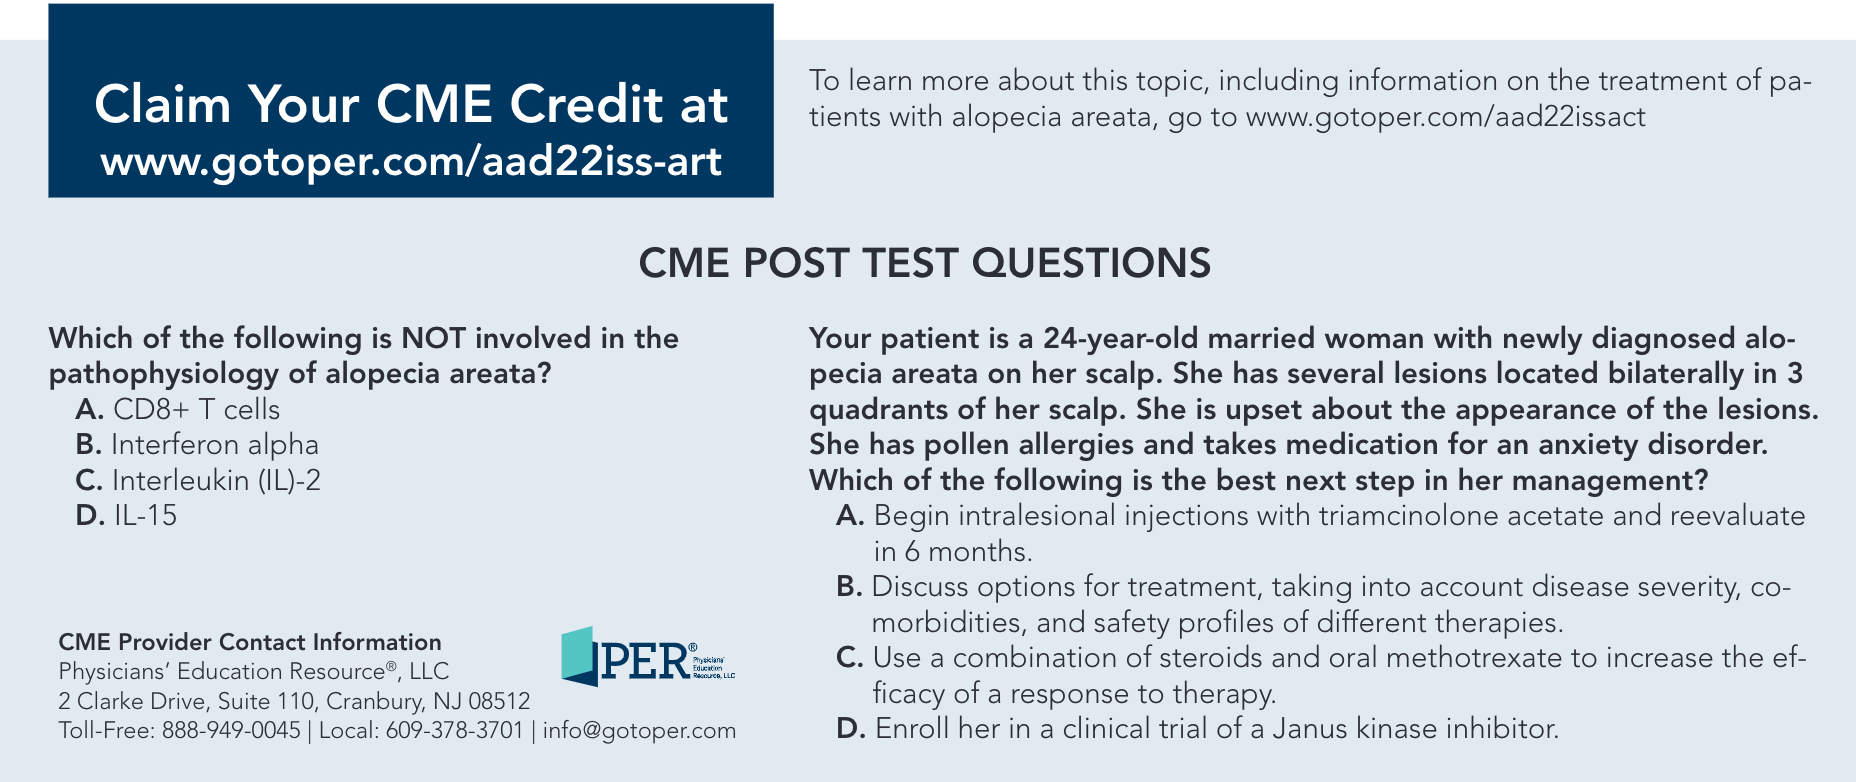 CME POST TEST QUESTIONS